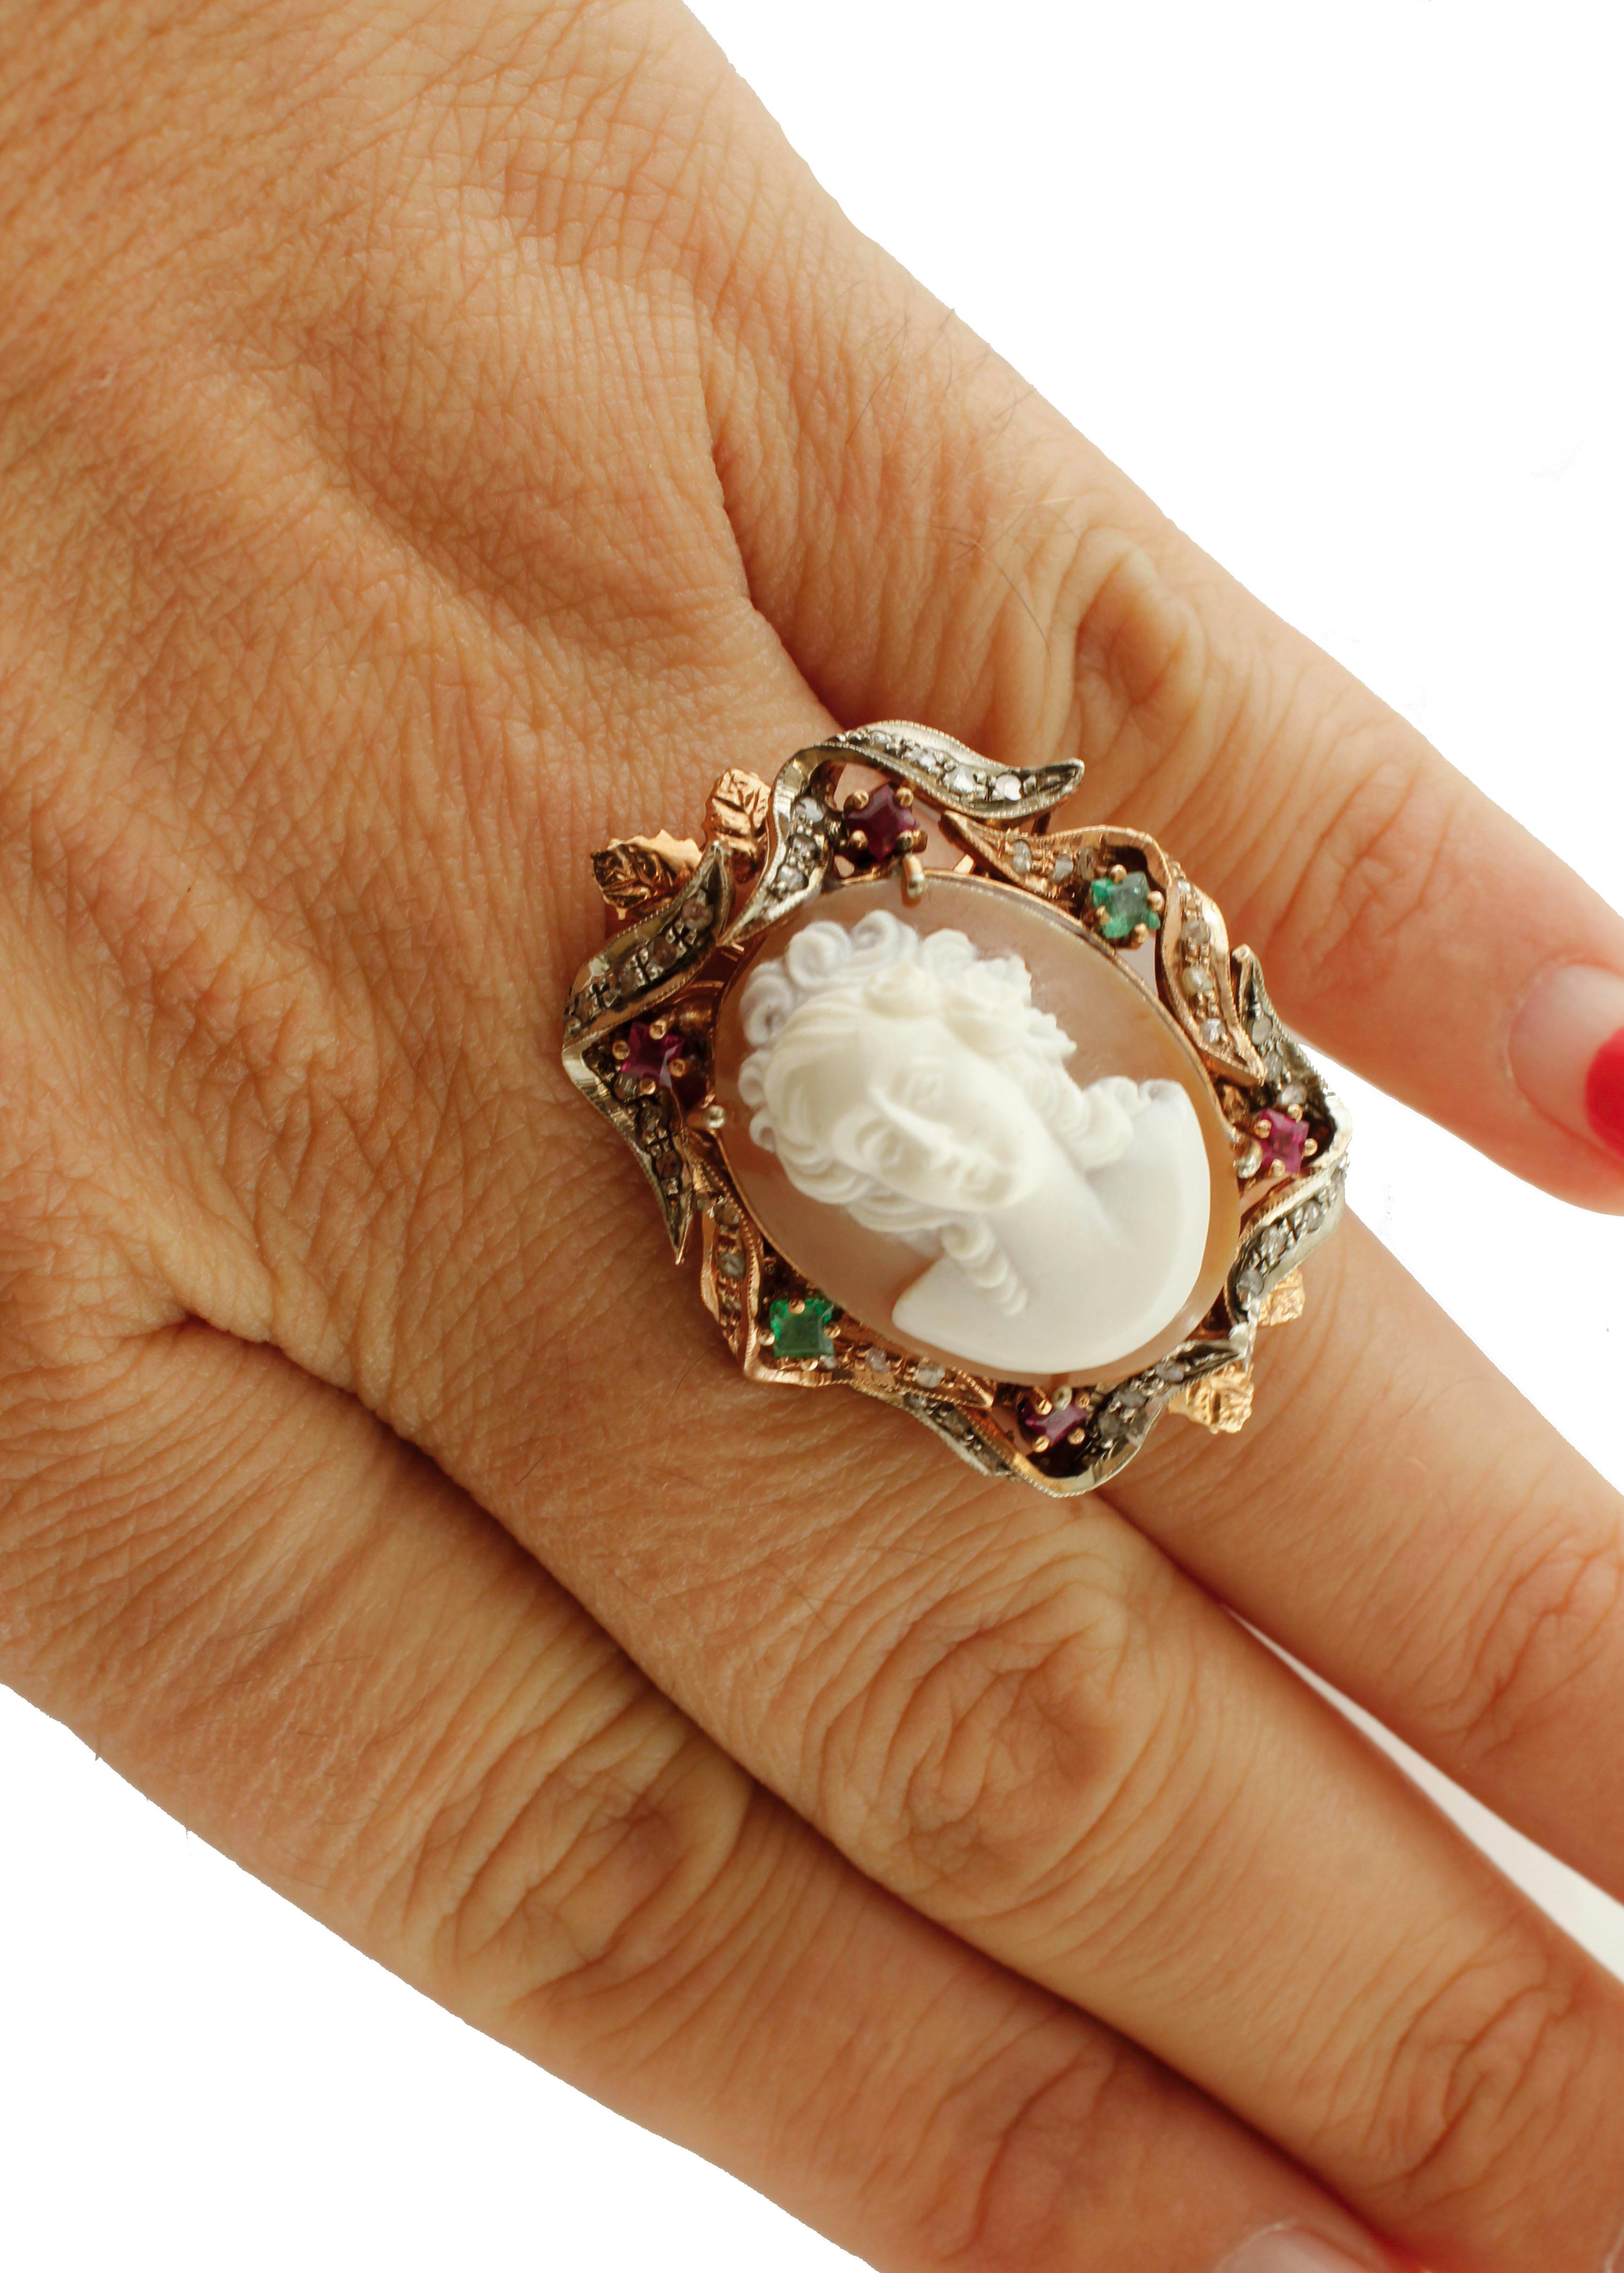 Mixed Cut Diamonds, Rubies, Emeralds, Cameo, 9 Karat Gold and Silver Cluster/Fashion Ring For Sale